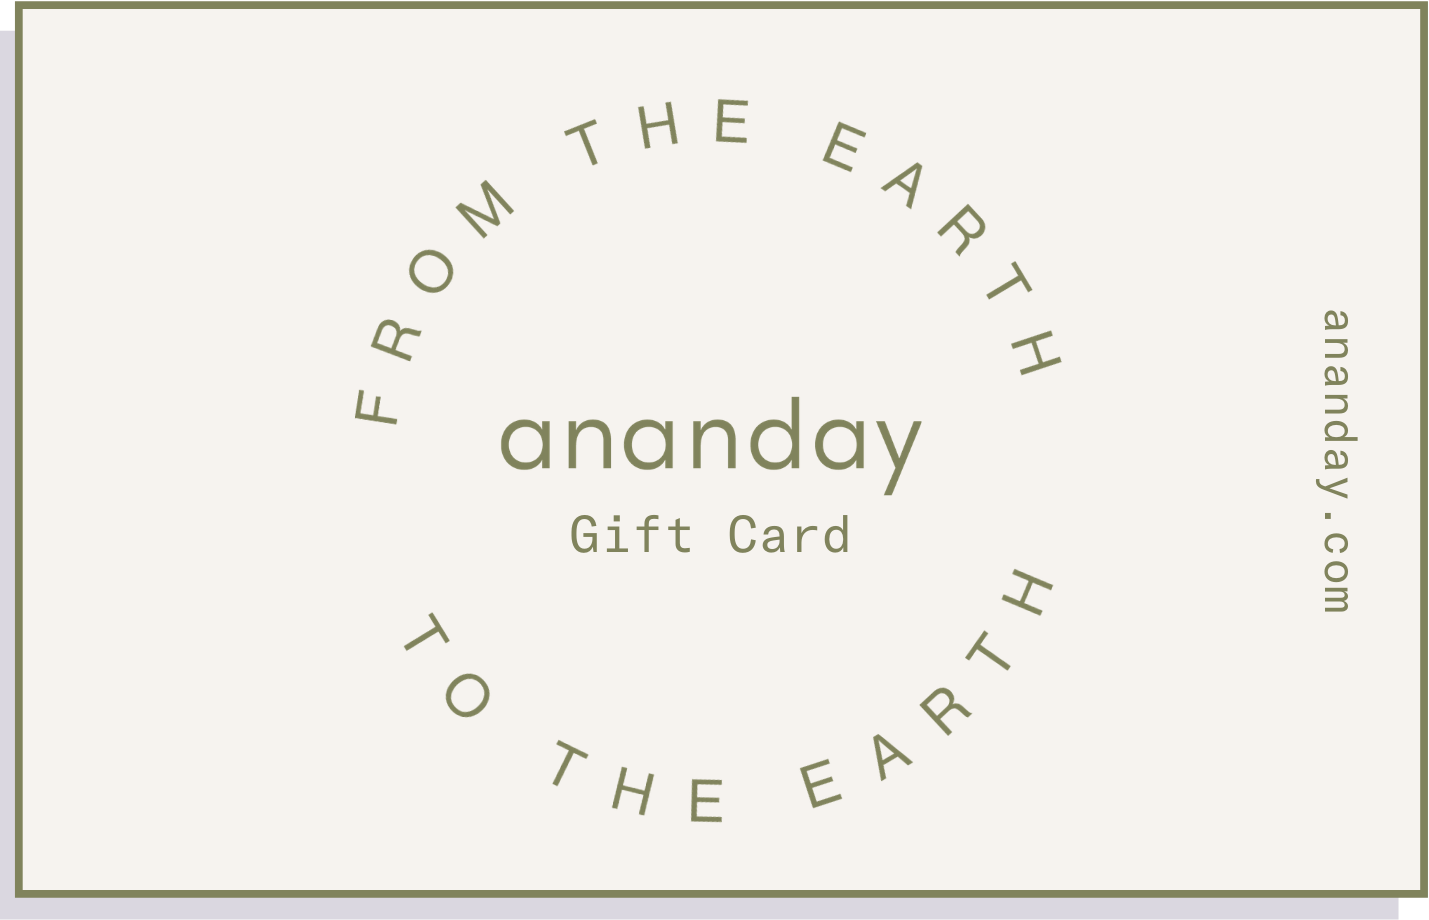 Home Practice Gift Card - Ananday